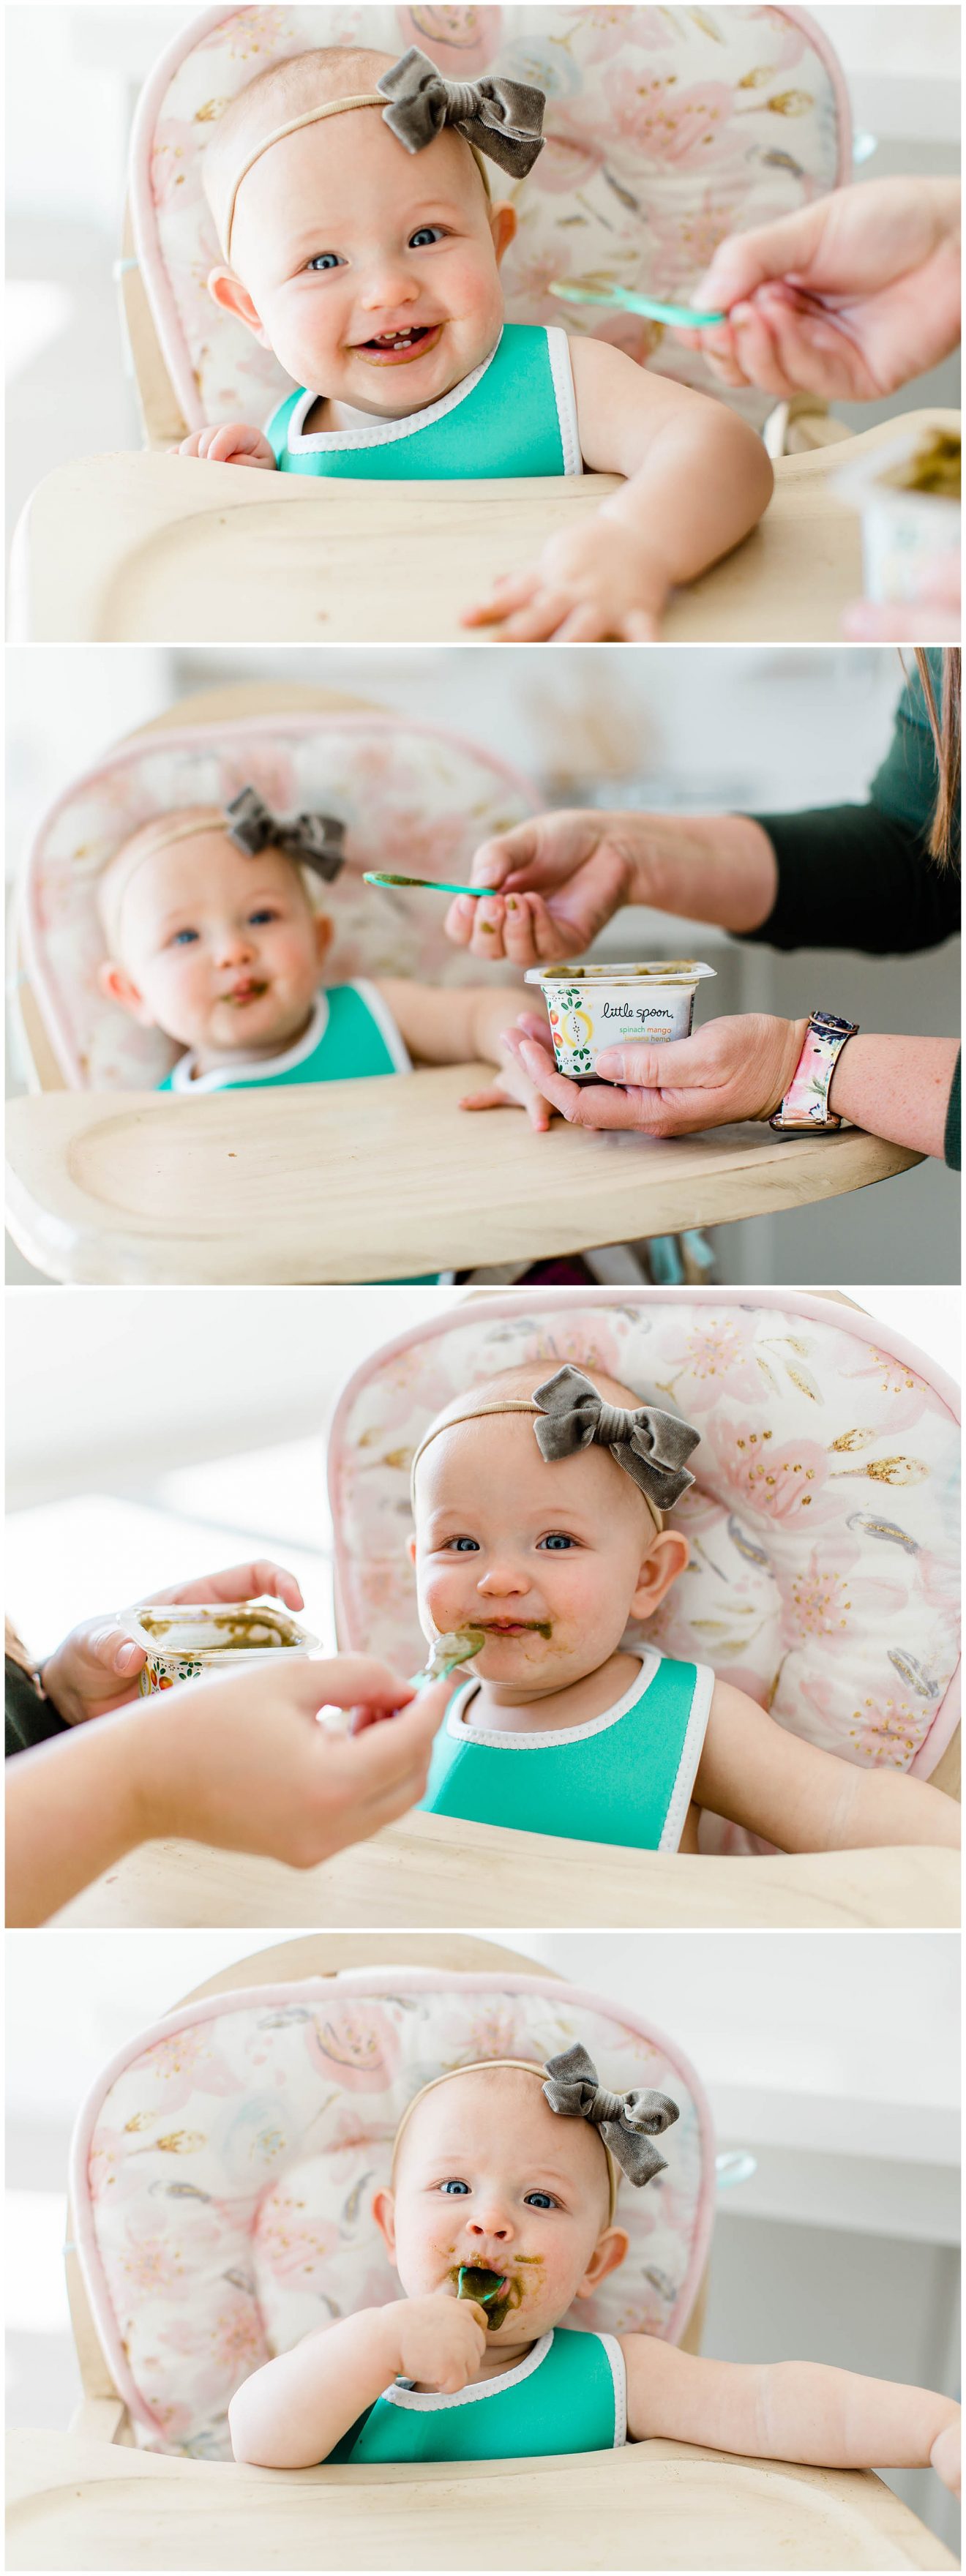 Little girl eating Little Spoon's organic baby food in her highchair.